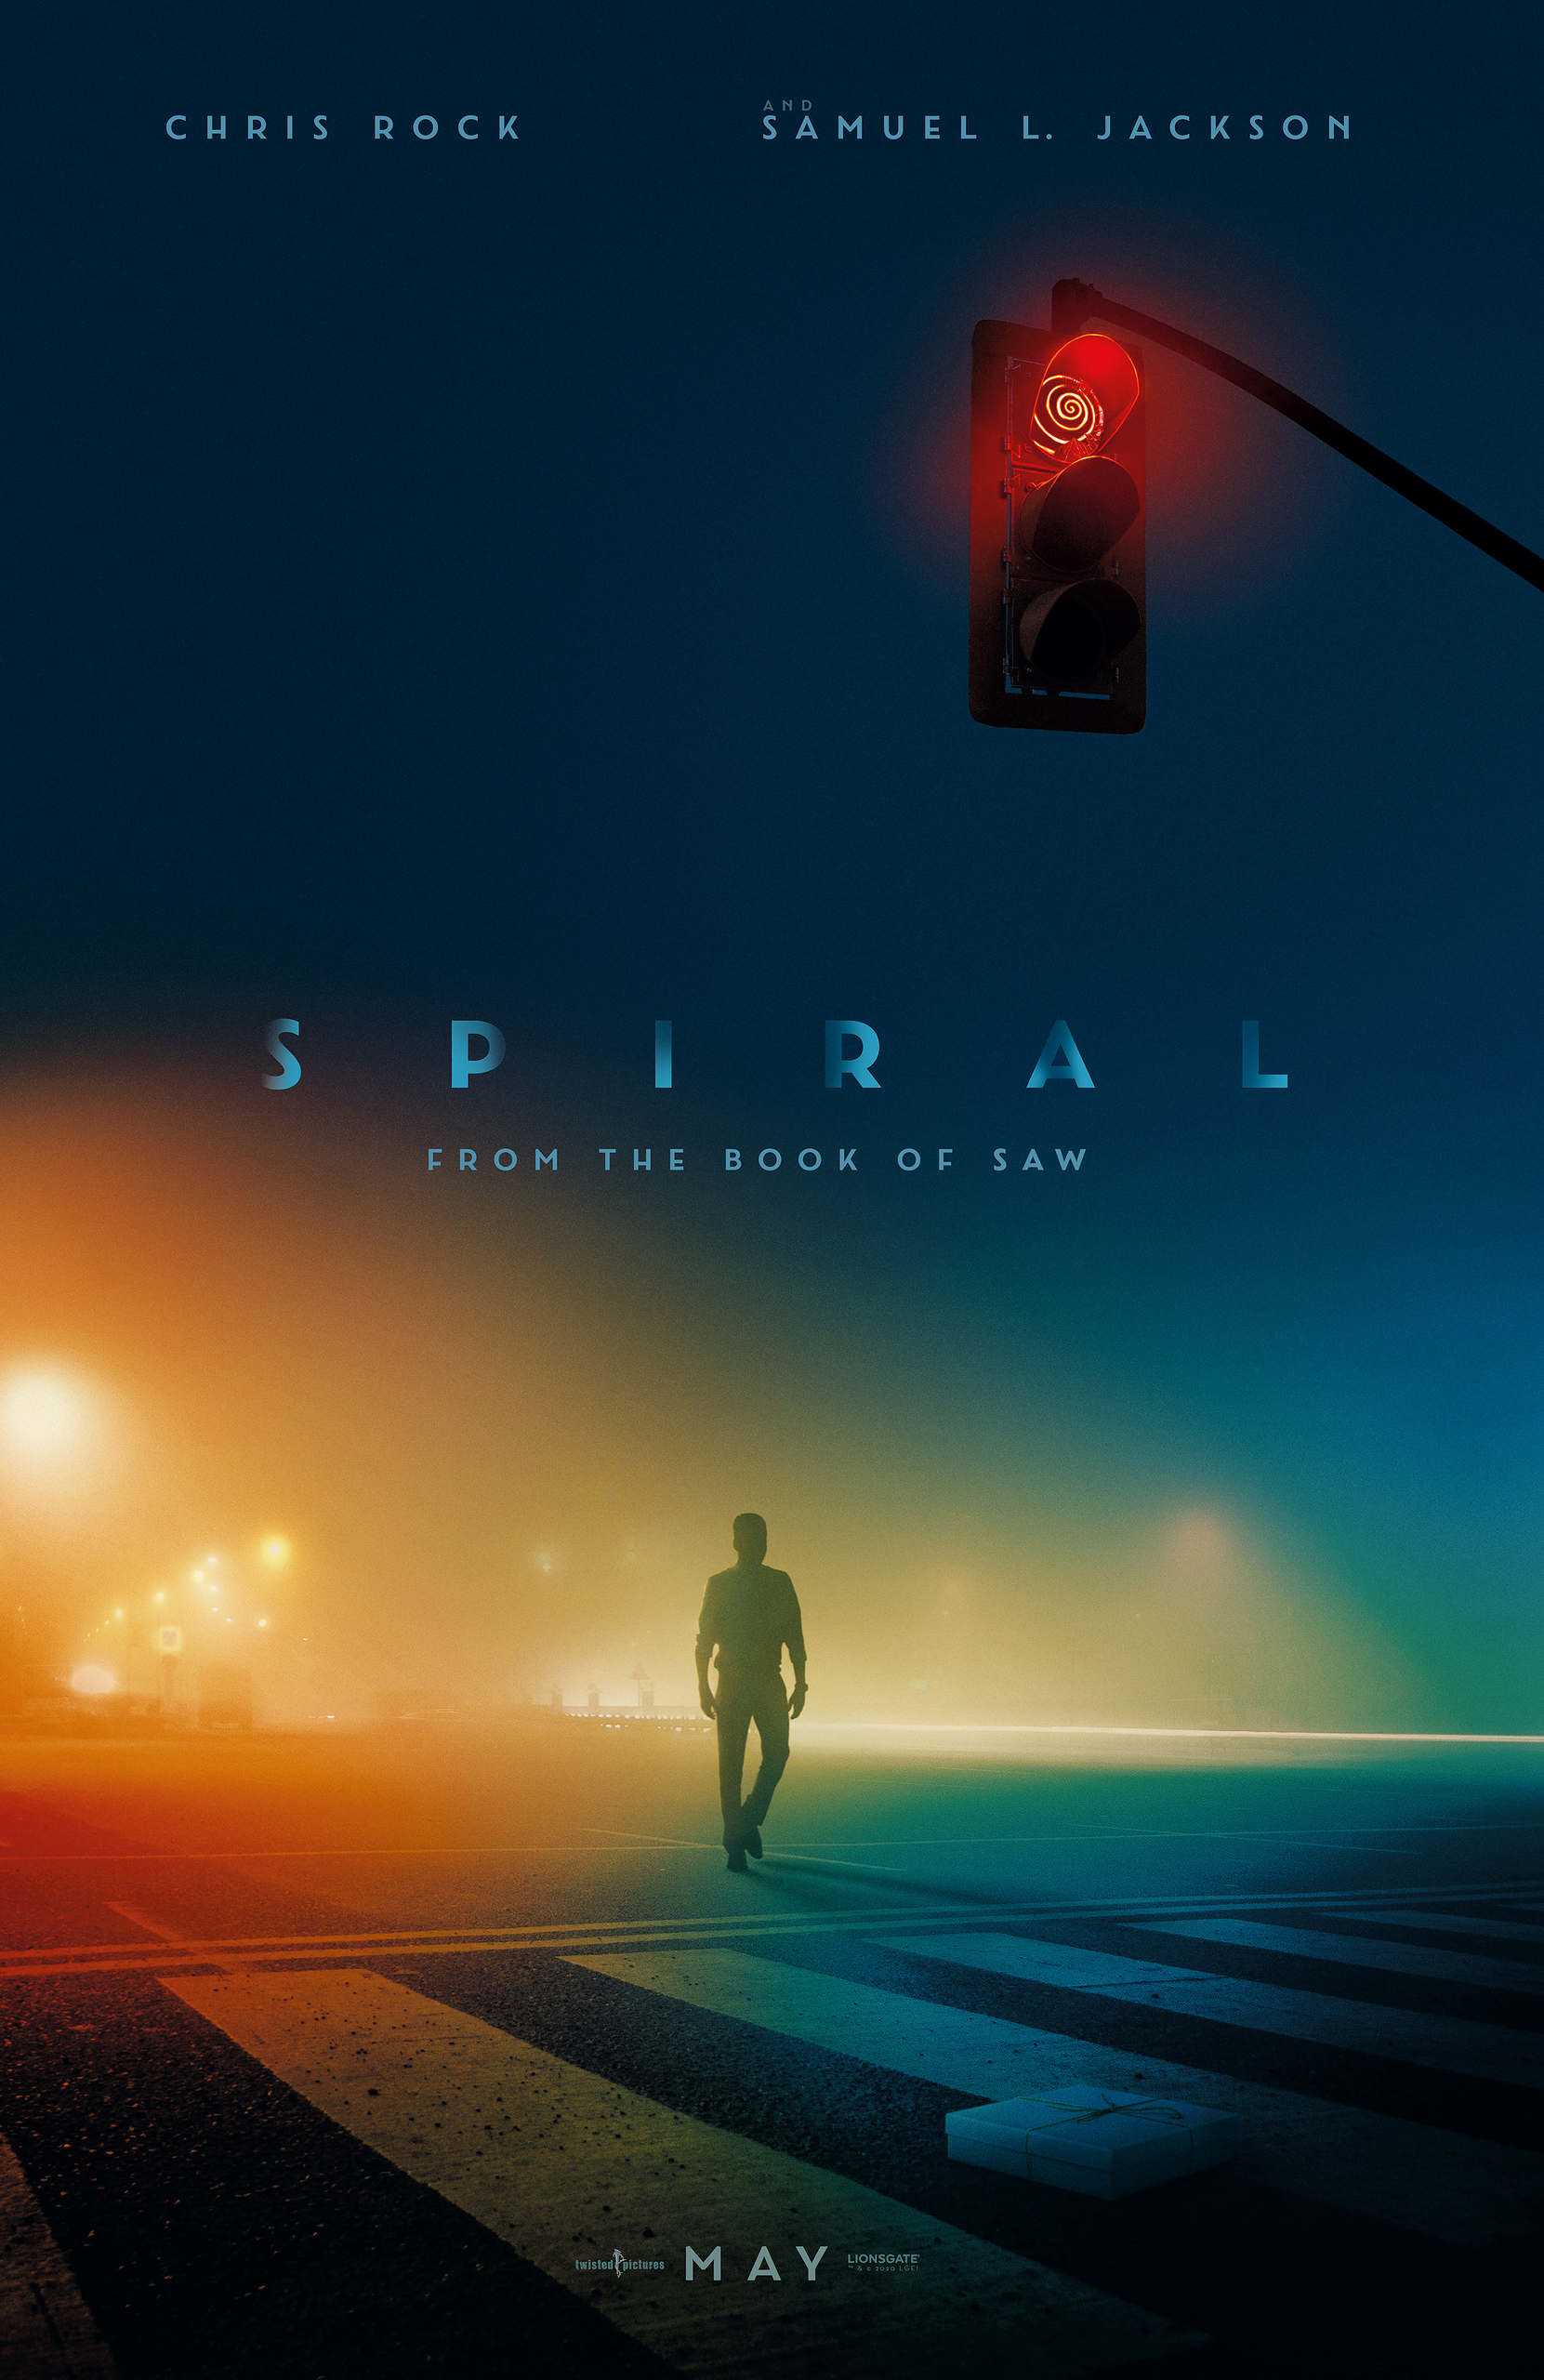 1st Trailer For 'Spiral: From The Book Of Saw' Movie Starring Chris Rock & Samuel L. Jackson